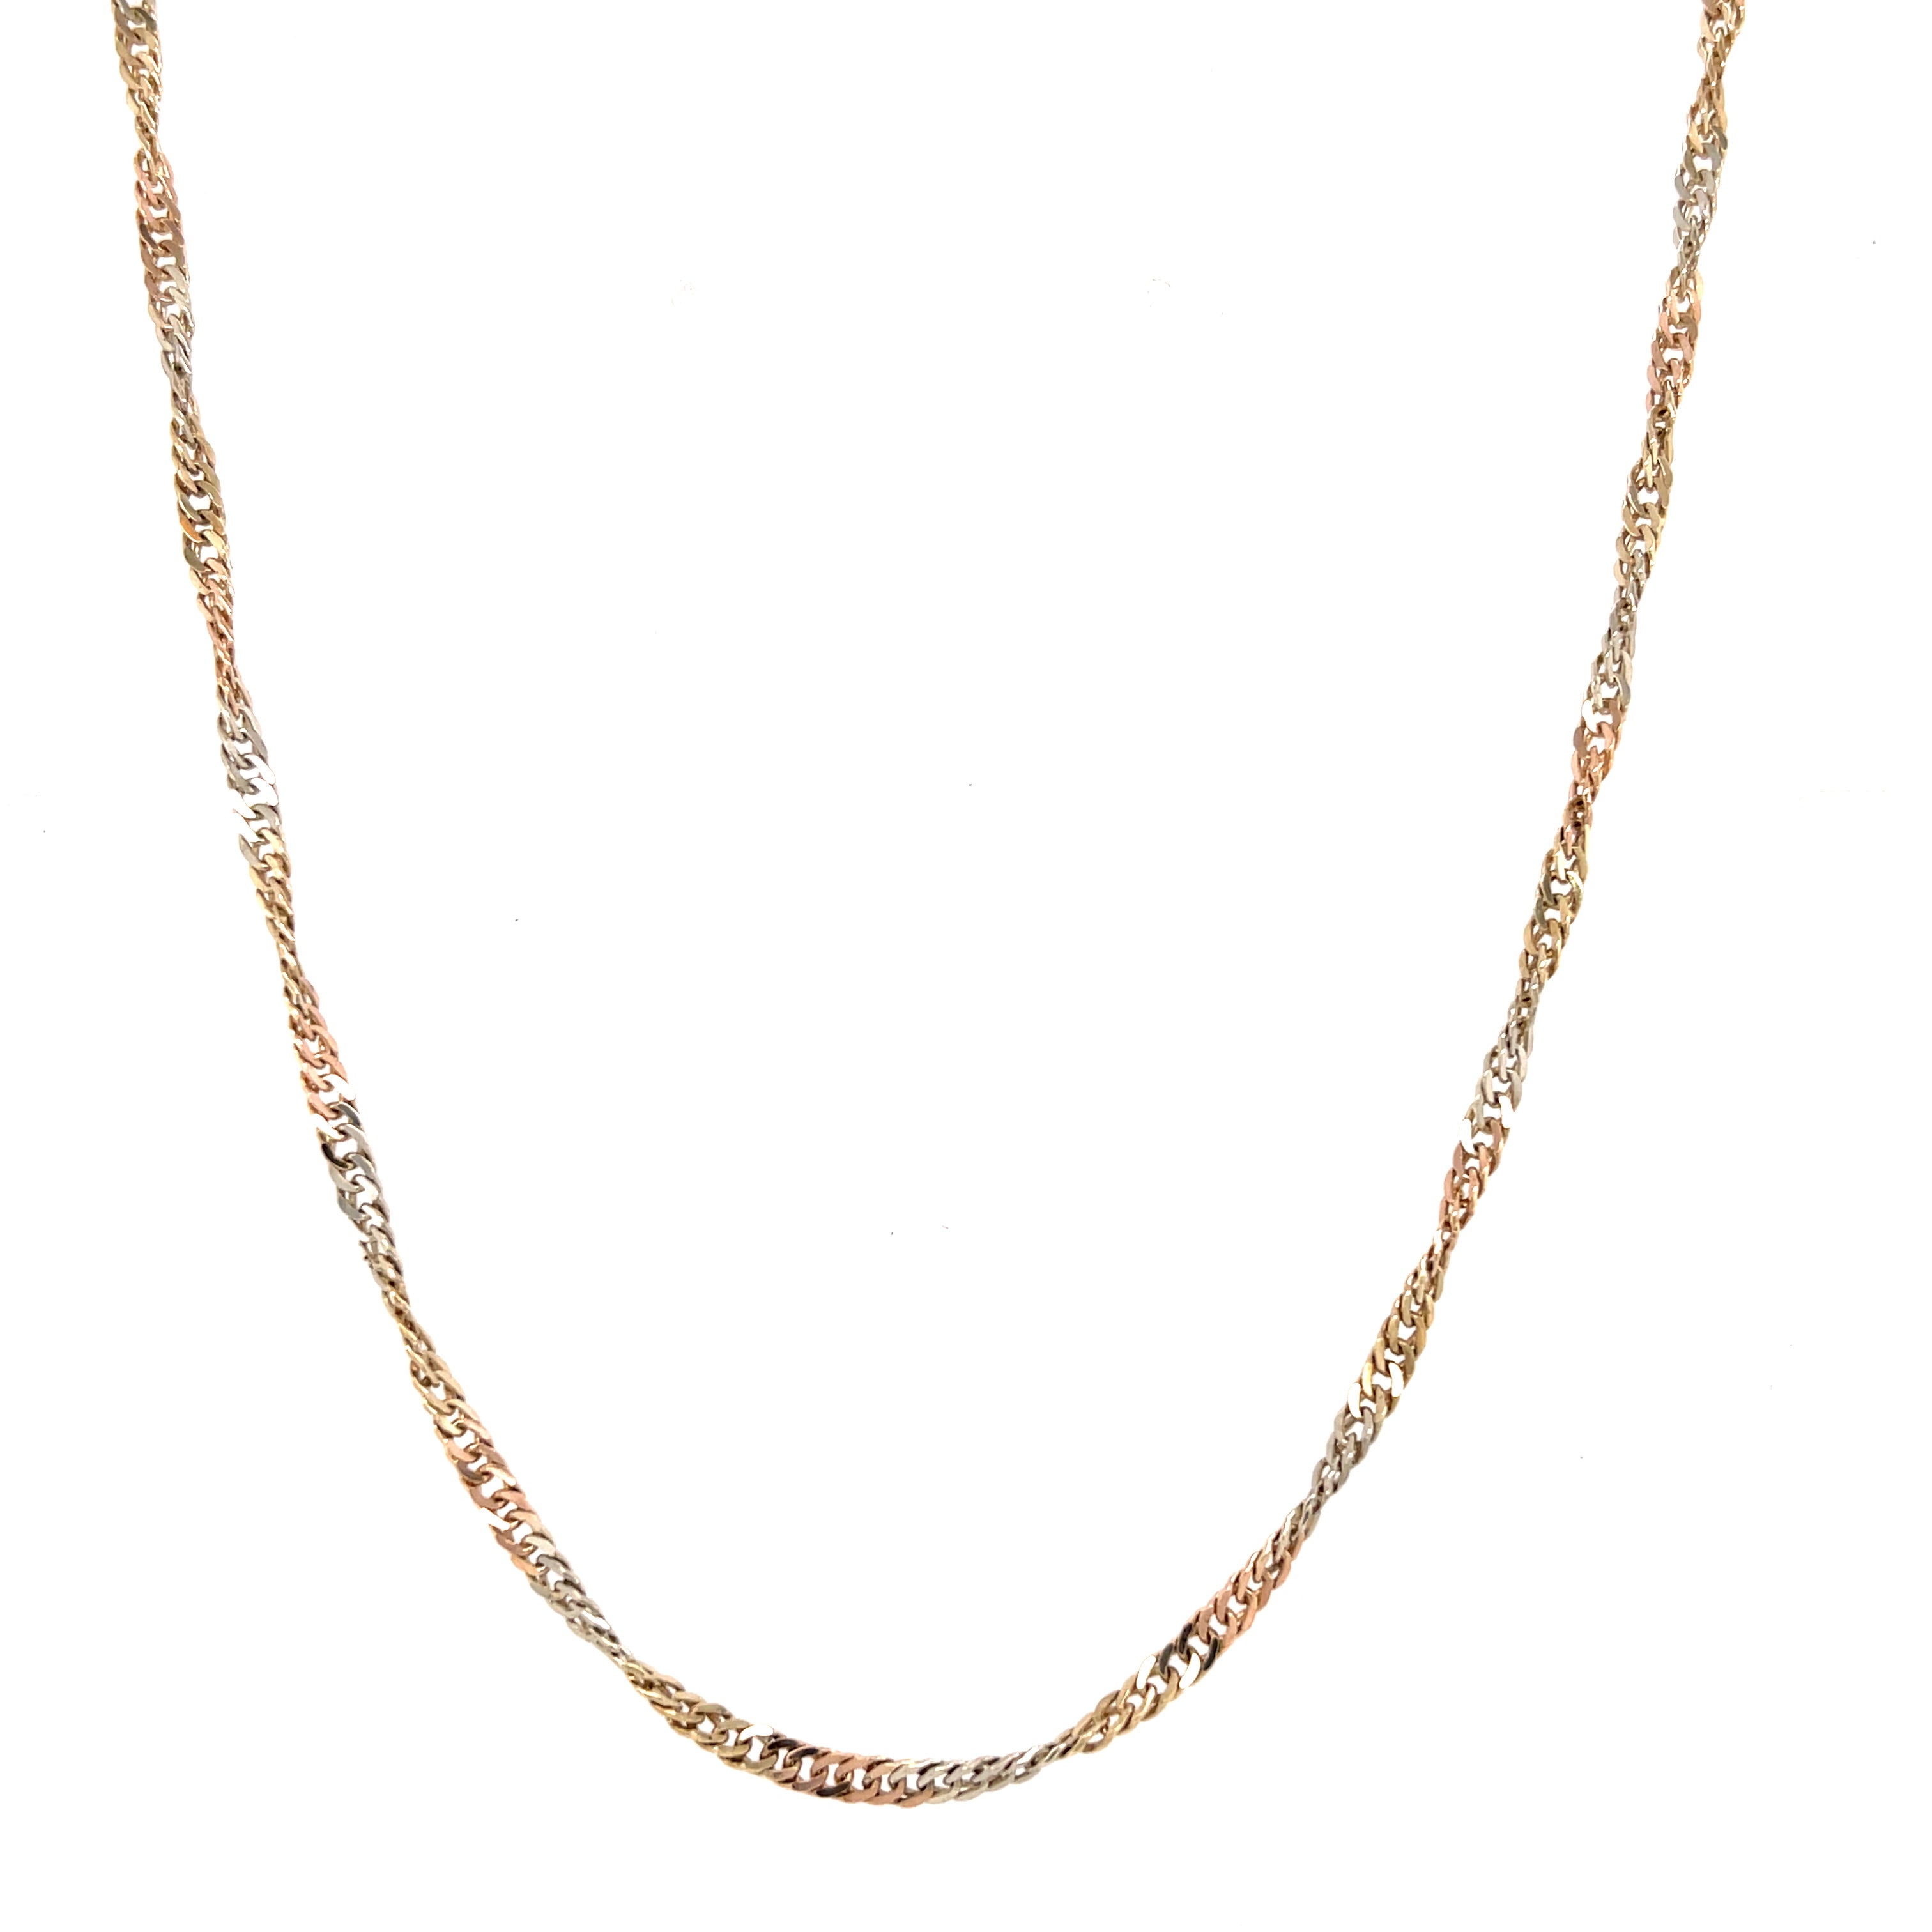 9ct Yellow, White & Rose Gold 16" Singapore Link Chain - 4.10g SOLD